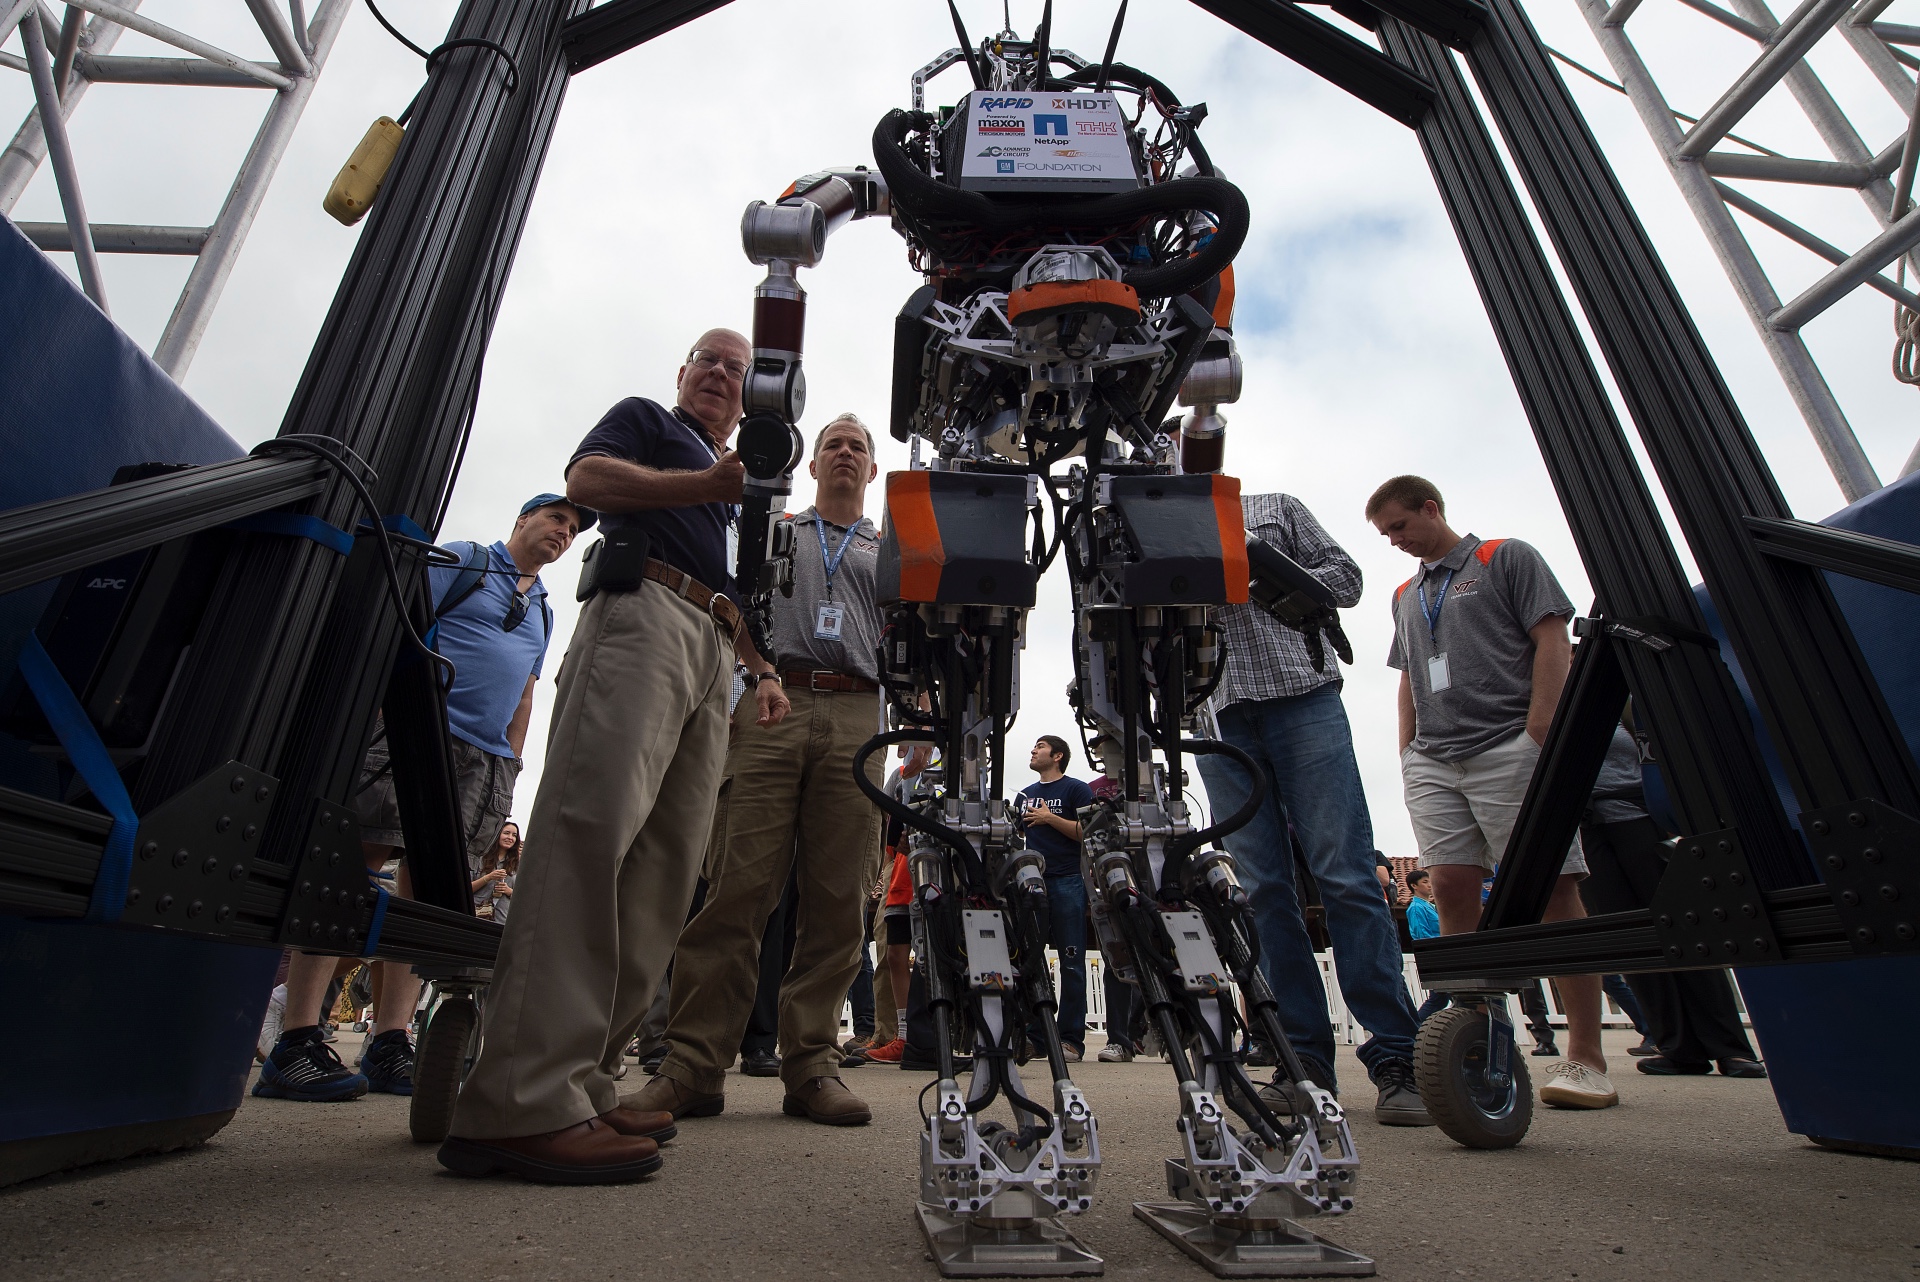 DARPA officials stand next to a robot during a competition